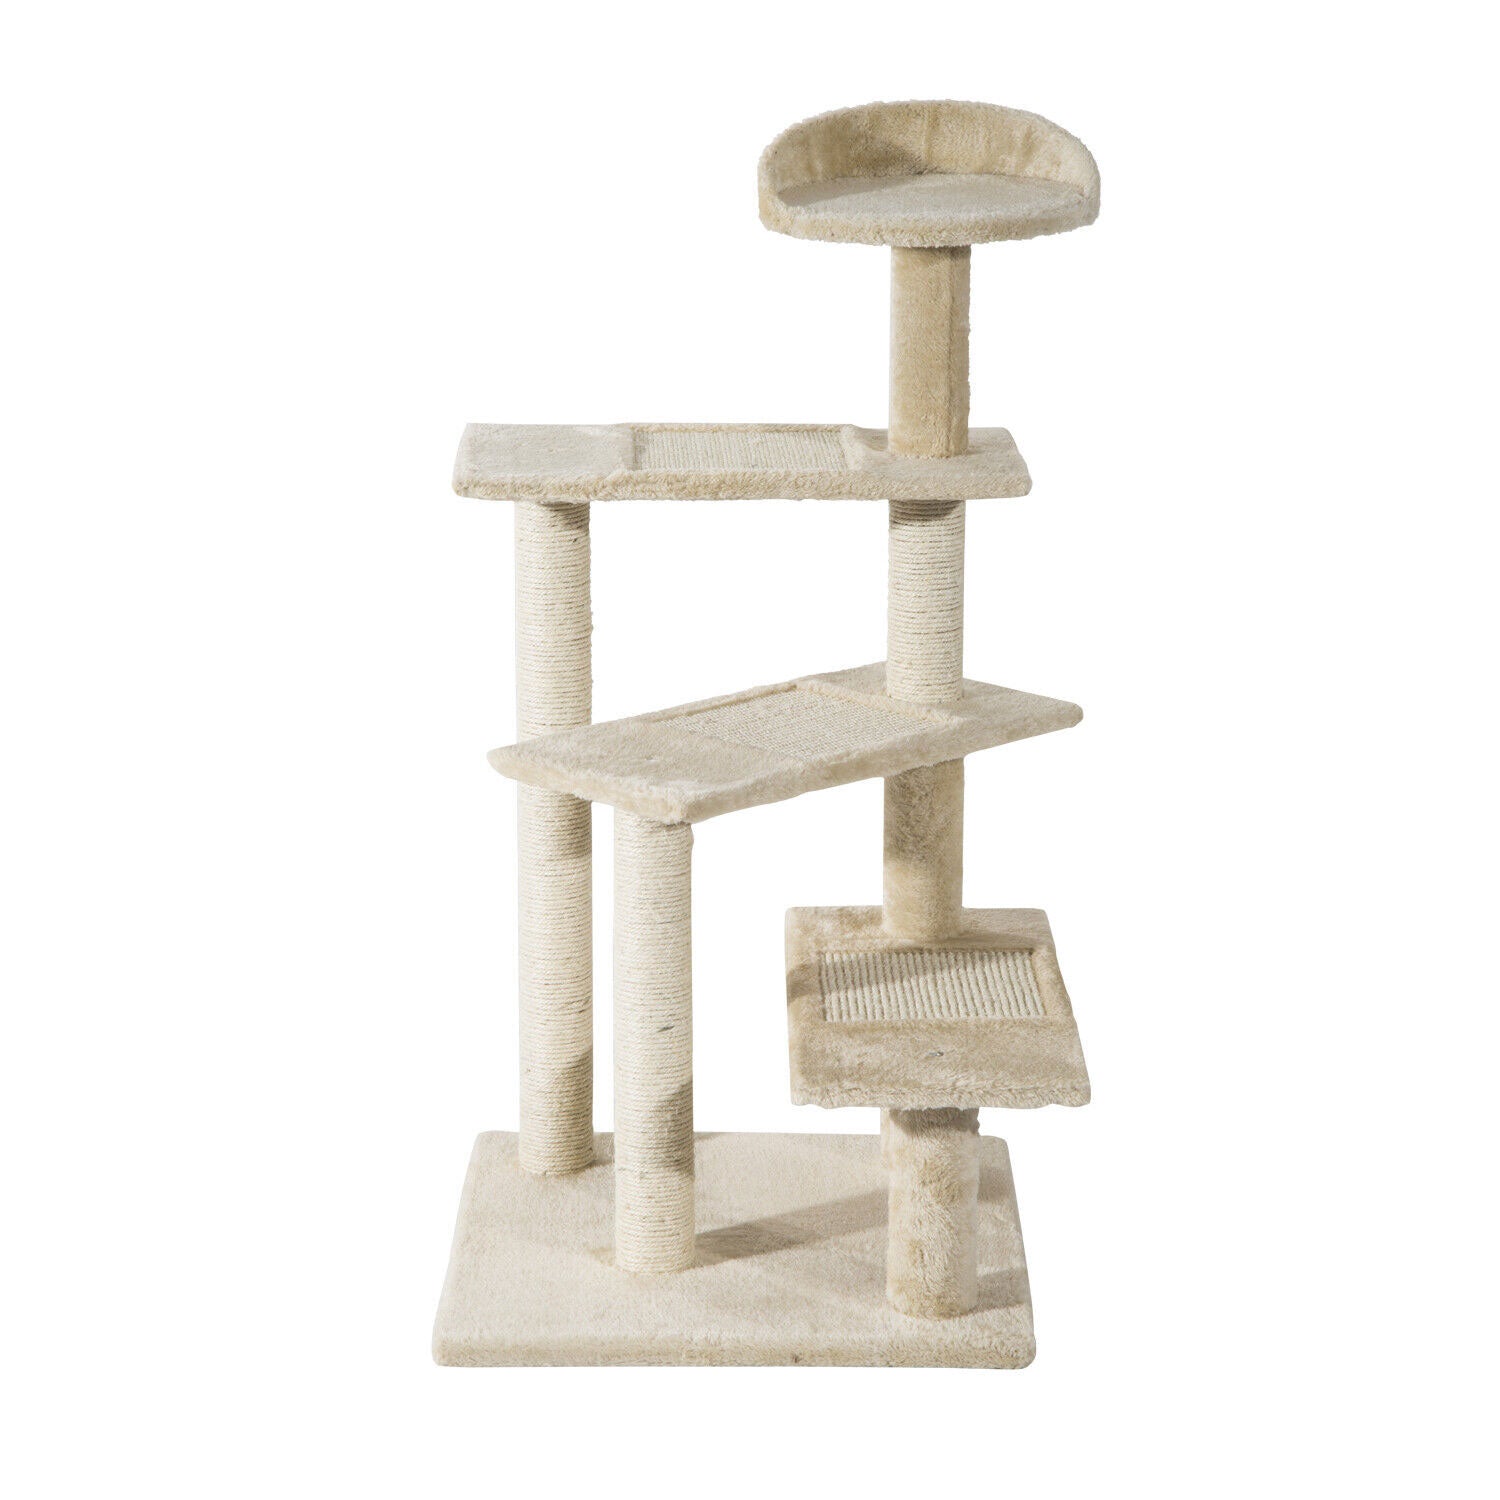 100cm Cat Tree Scratching Post Scratcher Pole Toy House Furniture Tower Condo - Beige